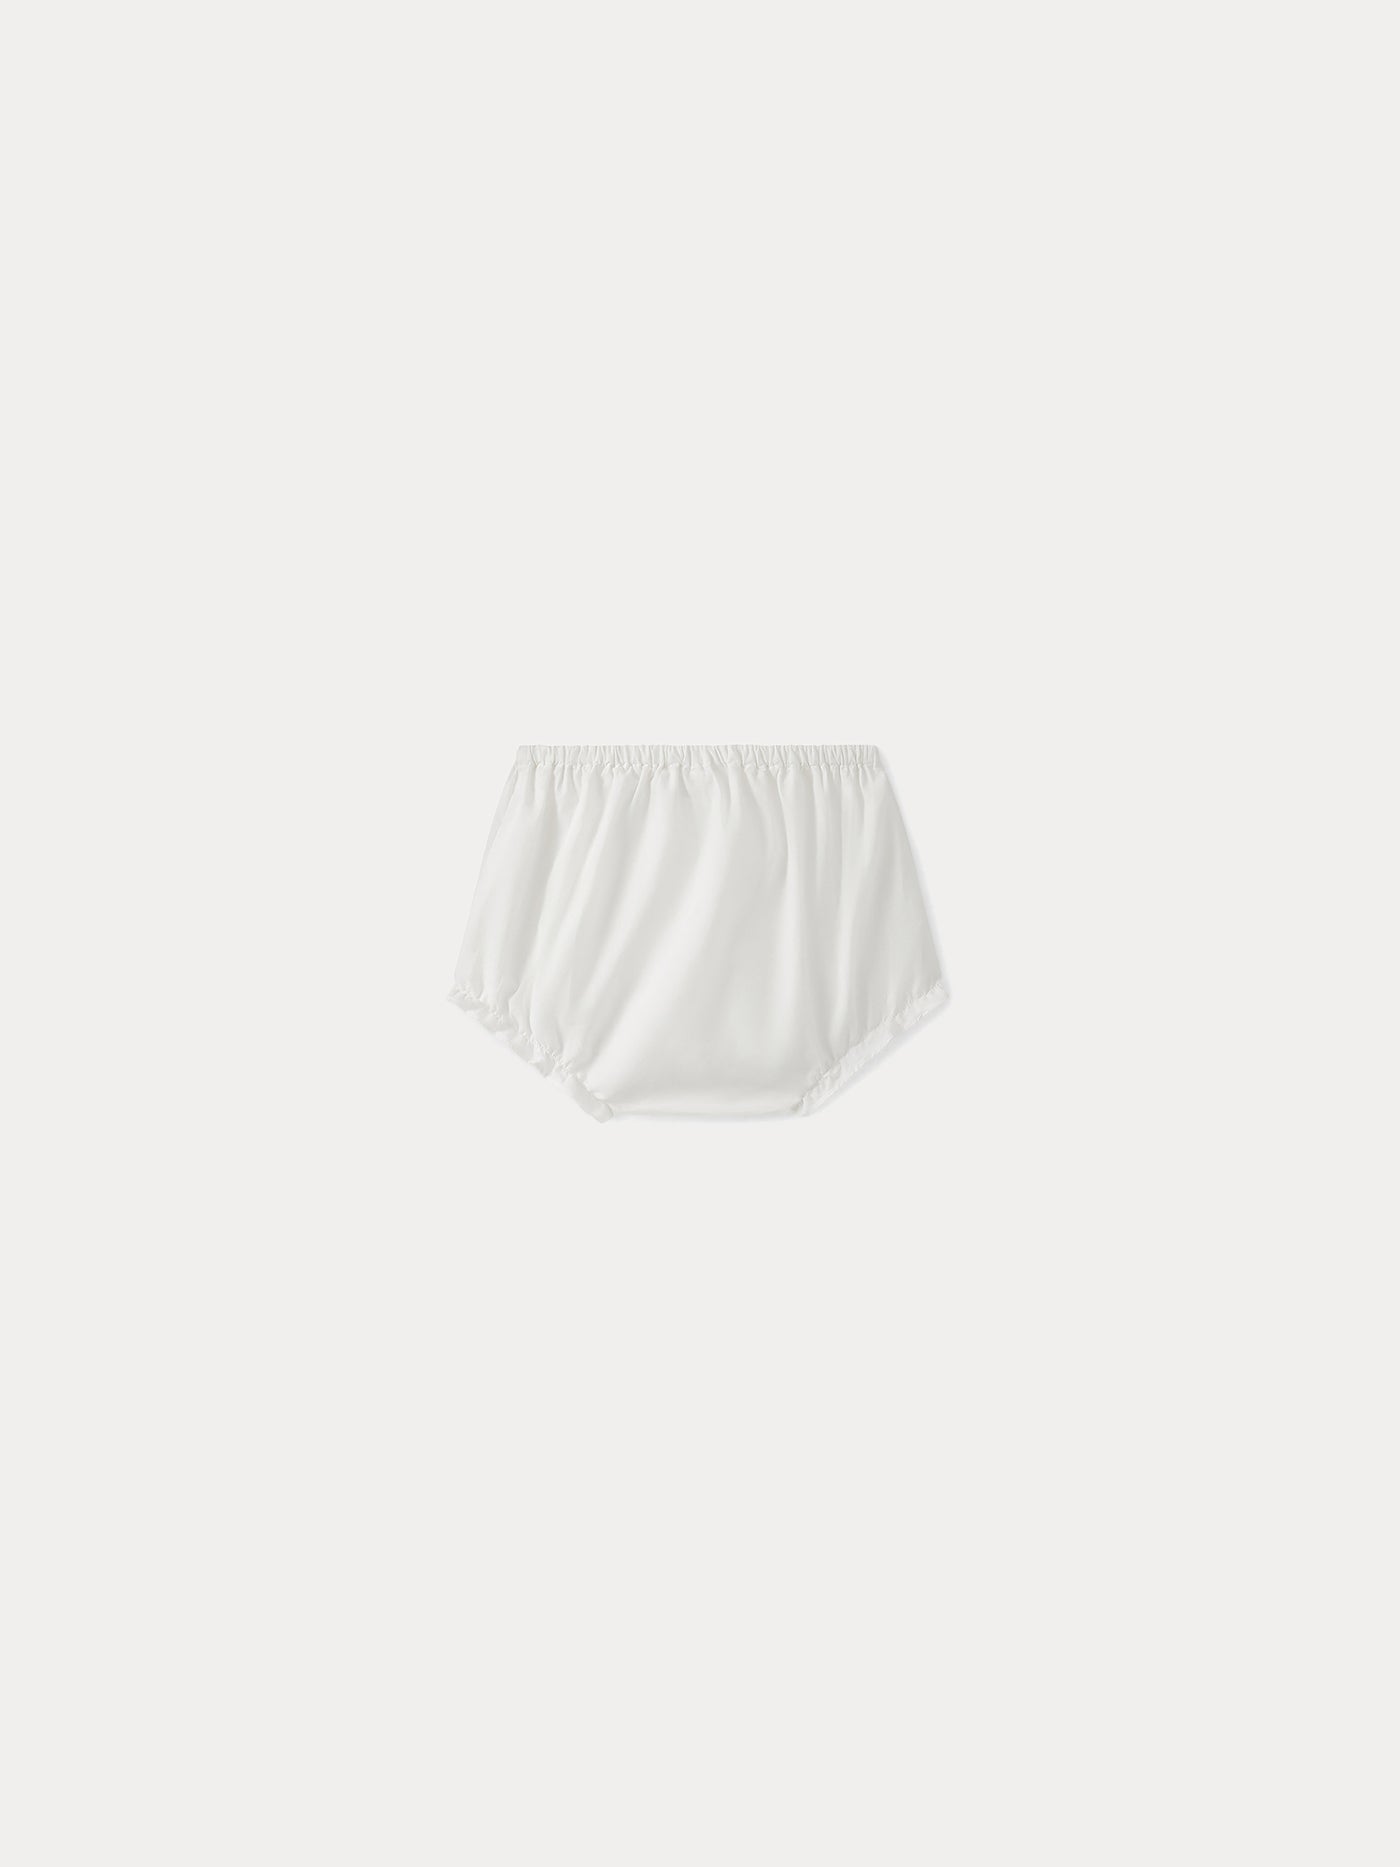 NEW Ecru (Ivory) Diaper Cover/Panty with Eyelet Ruffles for Babies